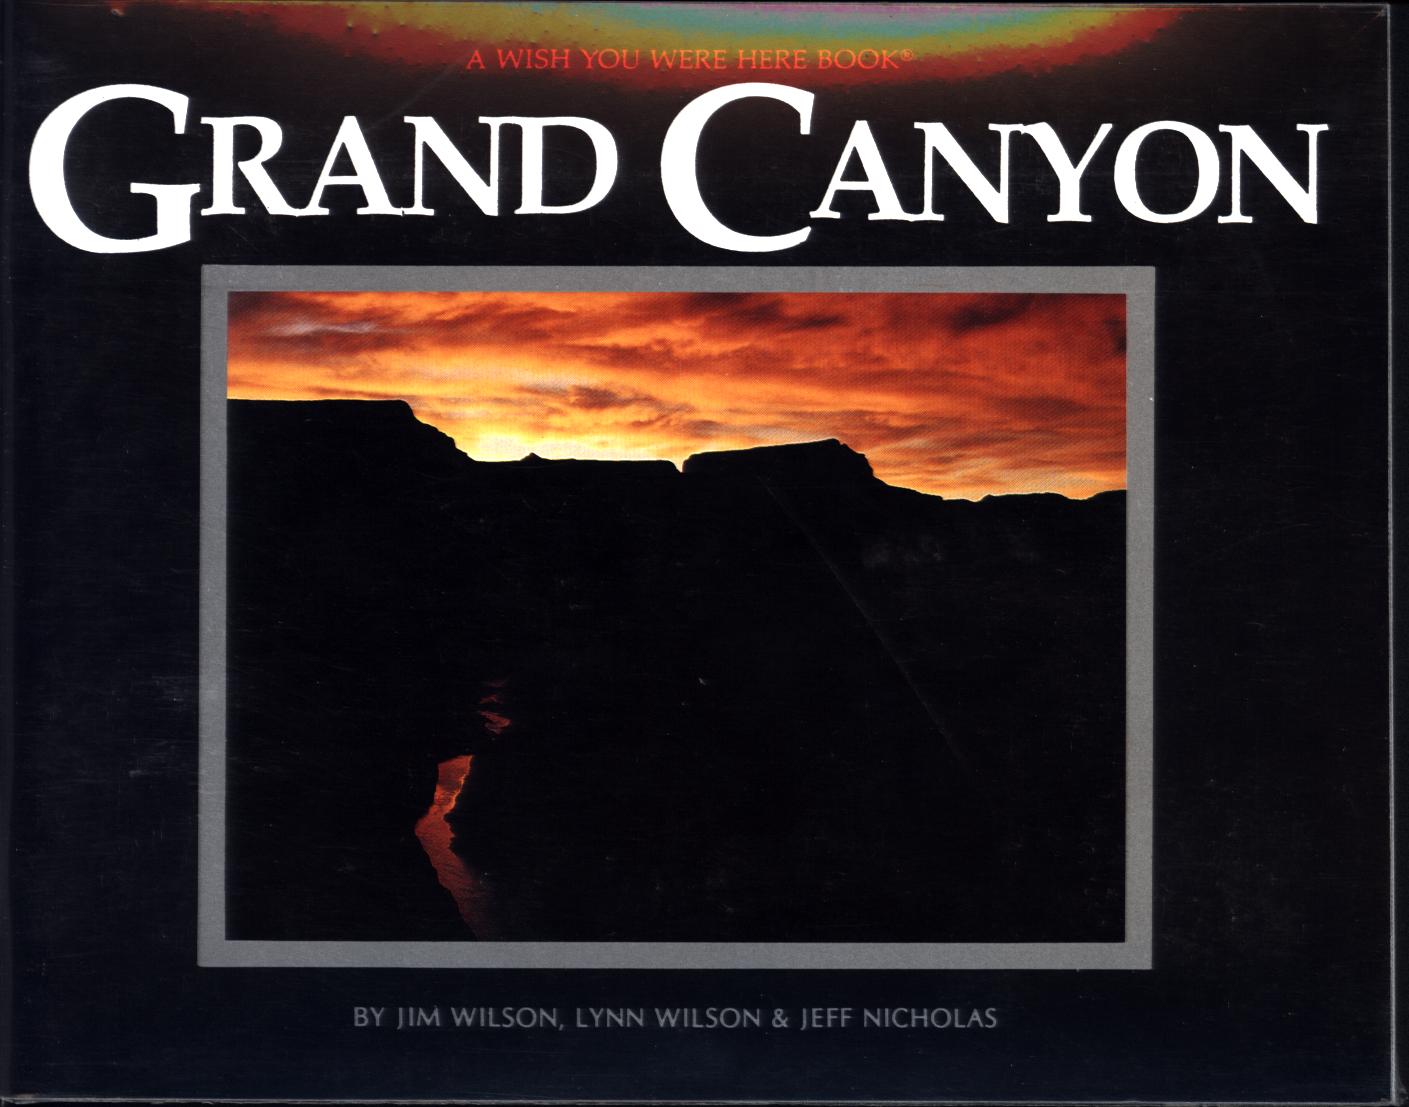 RAND CANYON: a wish you were here book.